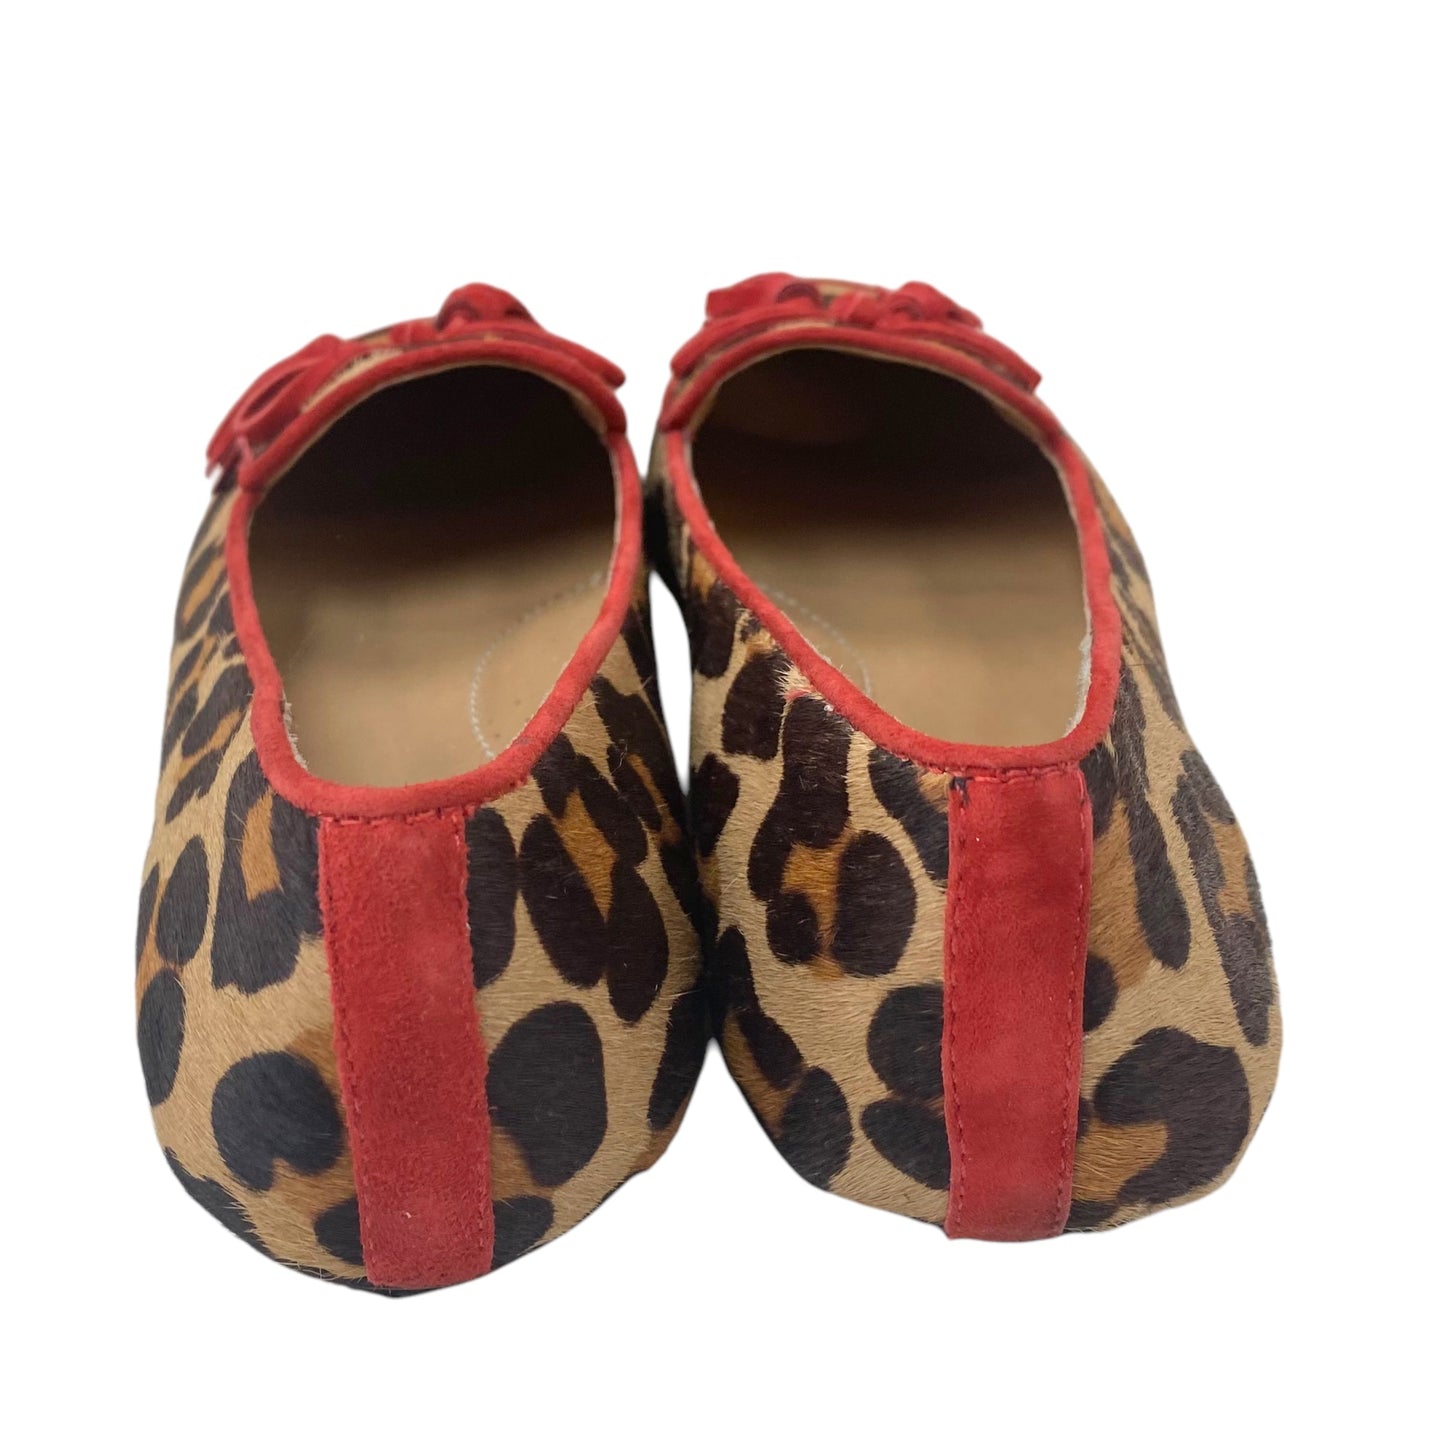 Shoes Flats By Vaneli  Size: 8.5